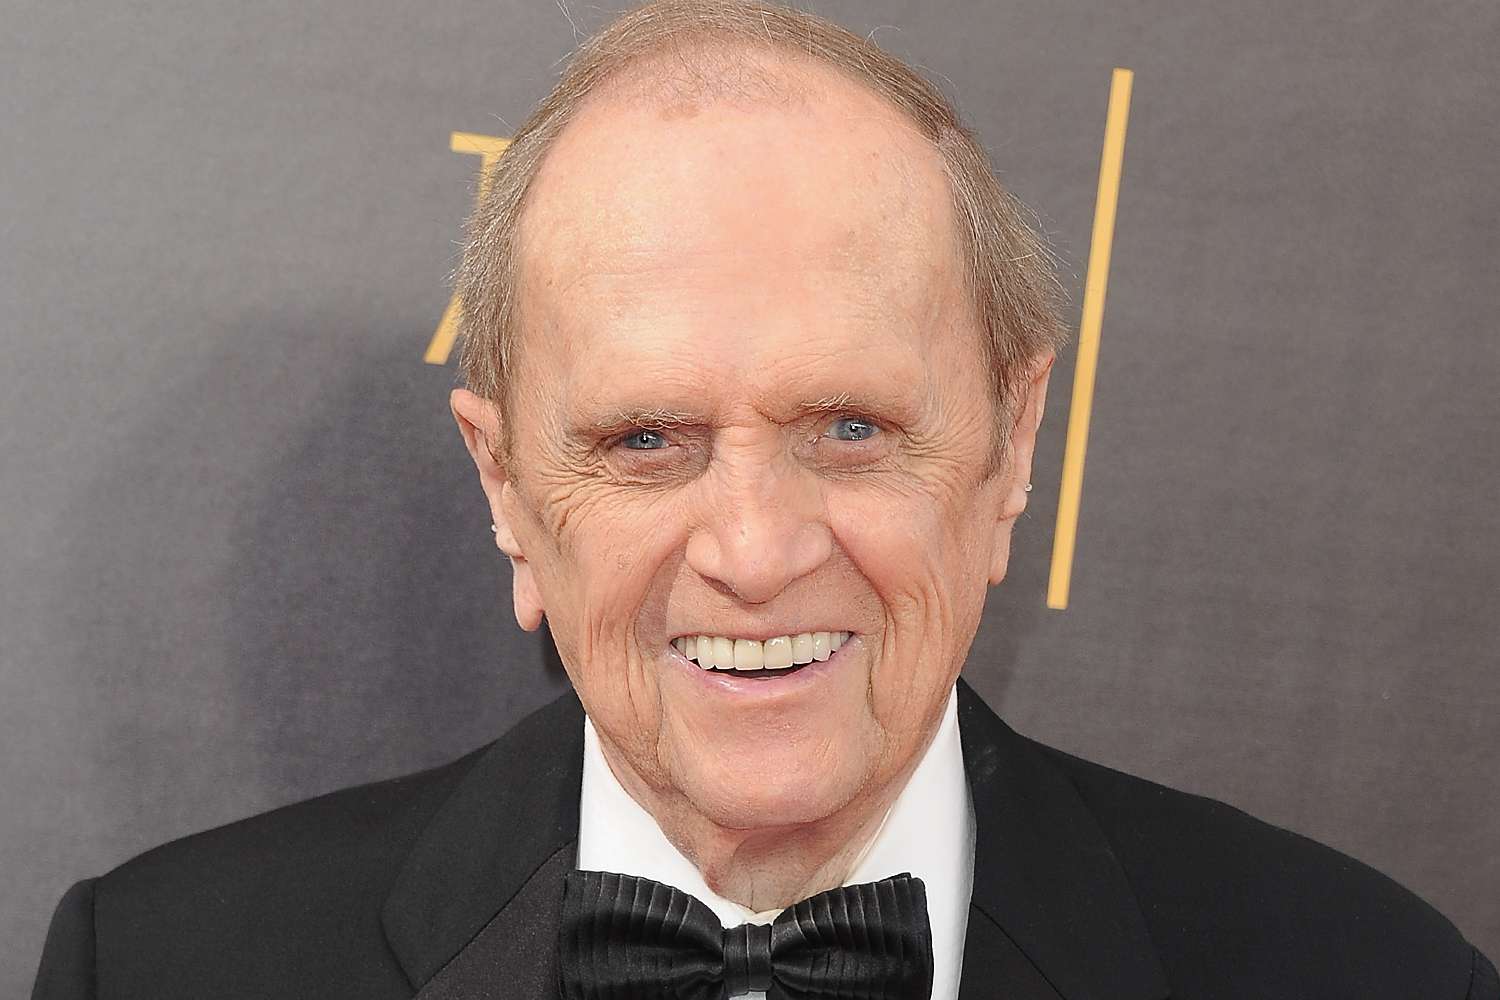 Iain Armitage, Judd Apatow and Other Stars Mourn Bob Newhart After His Death: 'Heaven Just Got a Whole Lot Funnier'